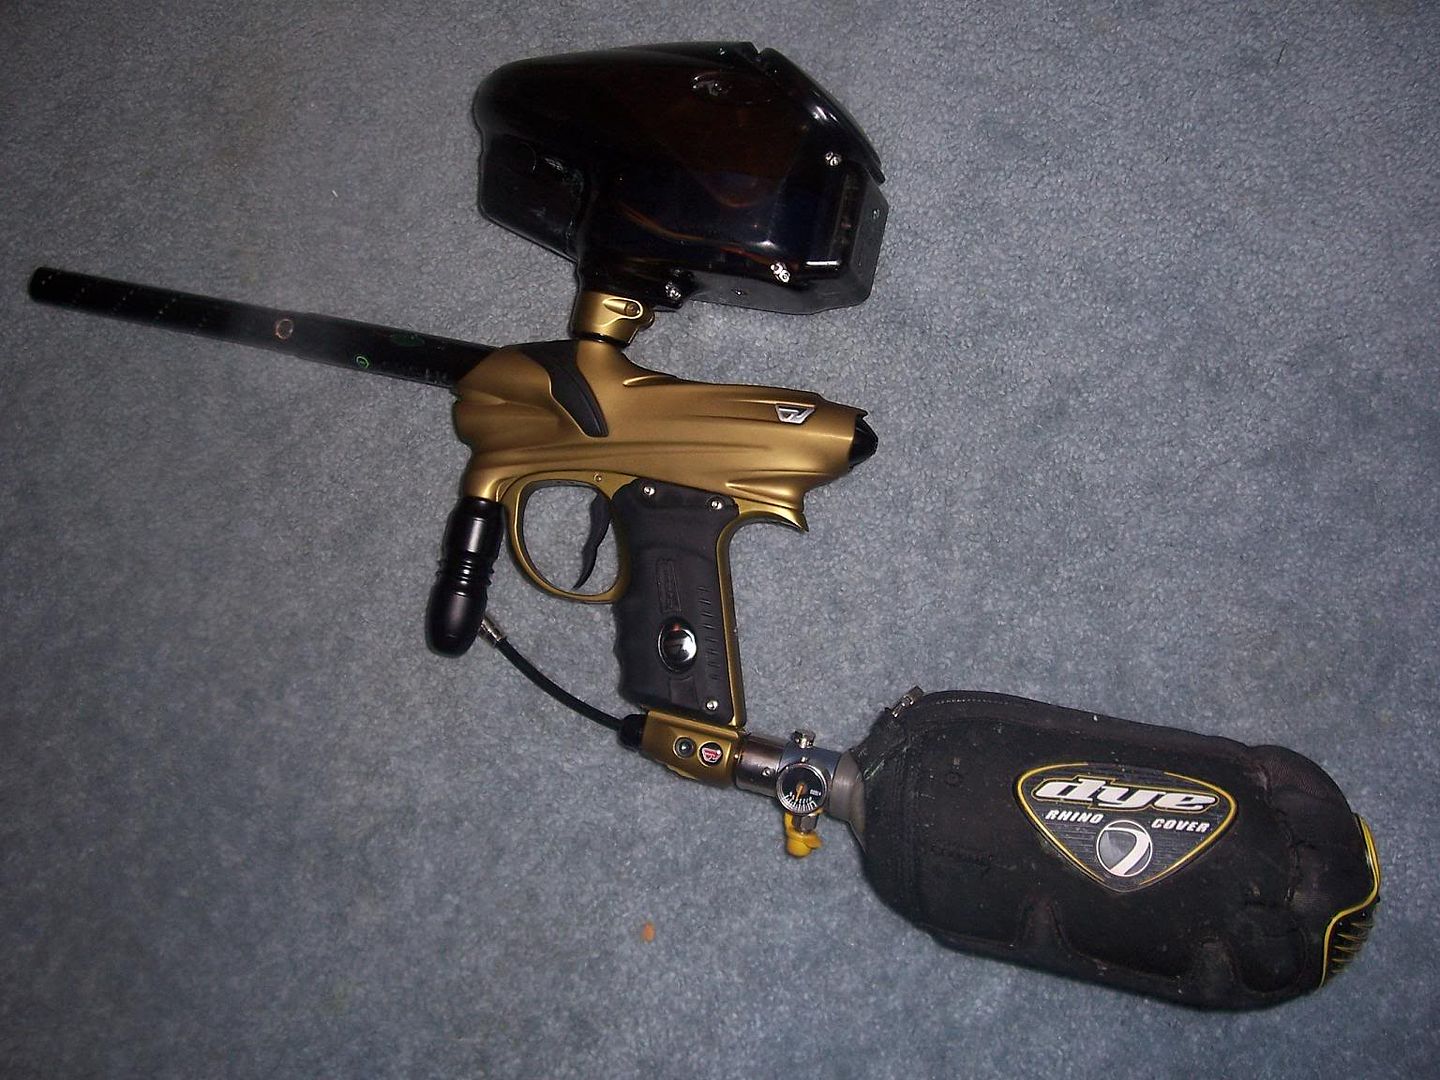 Pm6 Paintball Marker